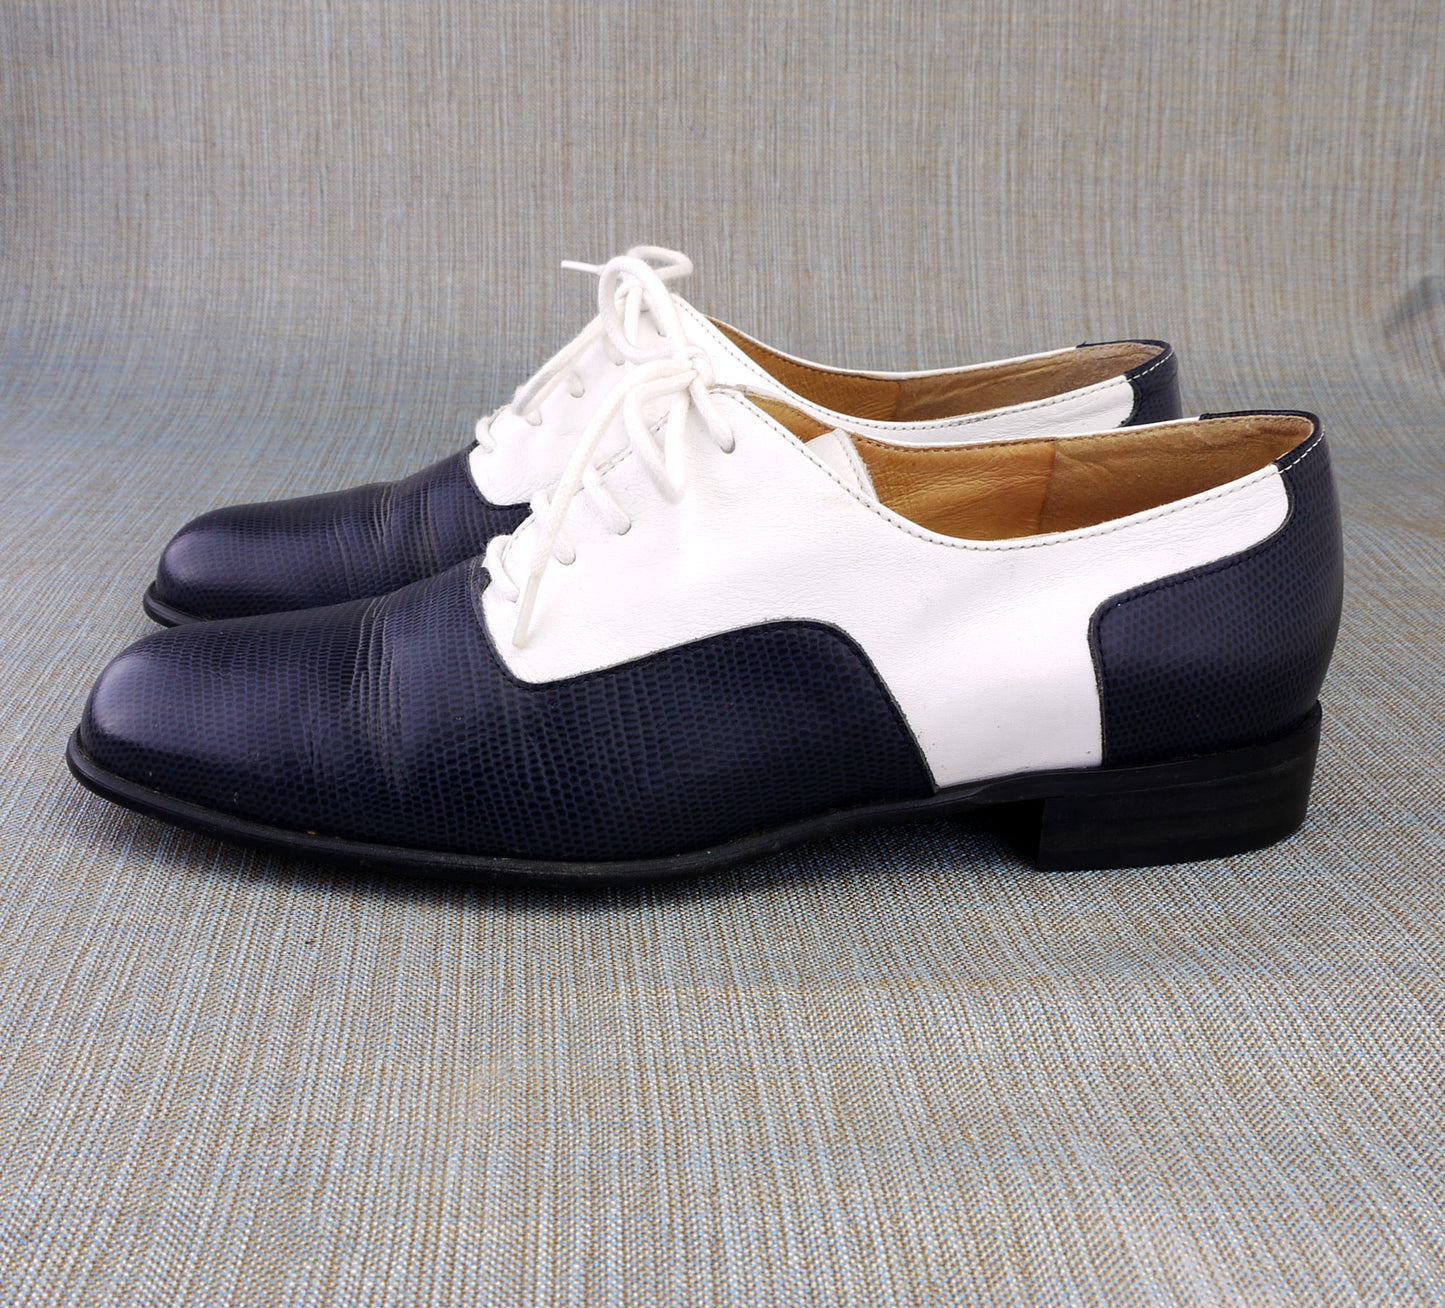 1980s Navy & White Lace Up Spectators by Pindiere UK 5